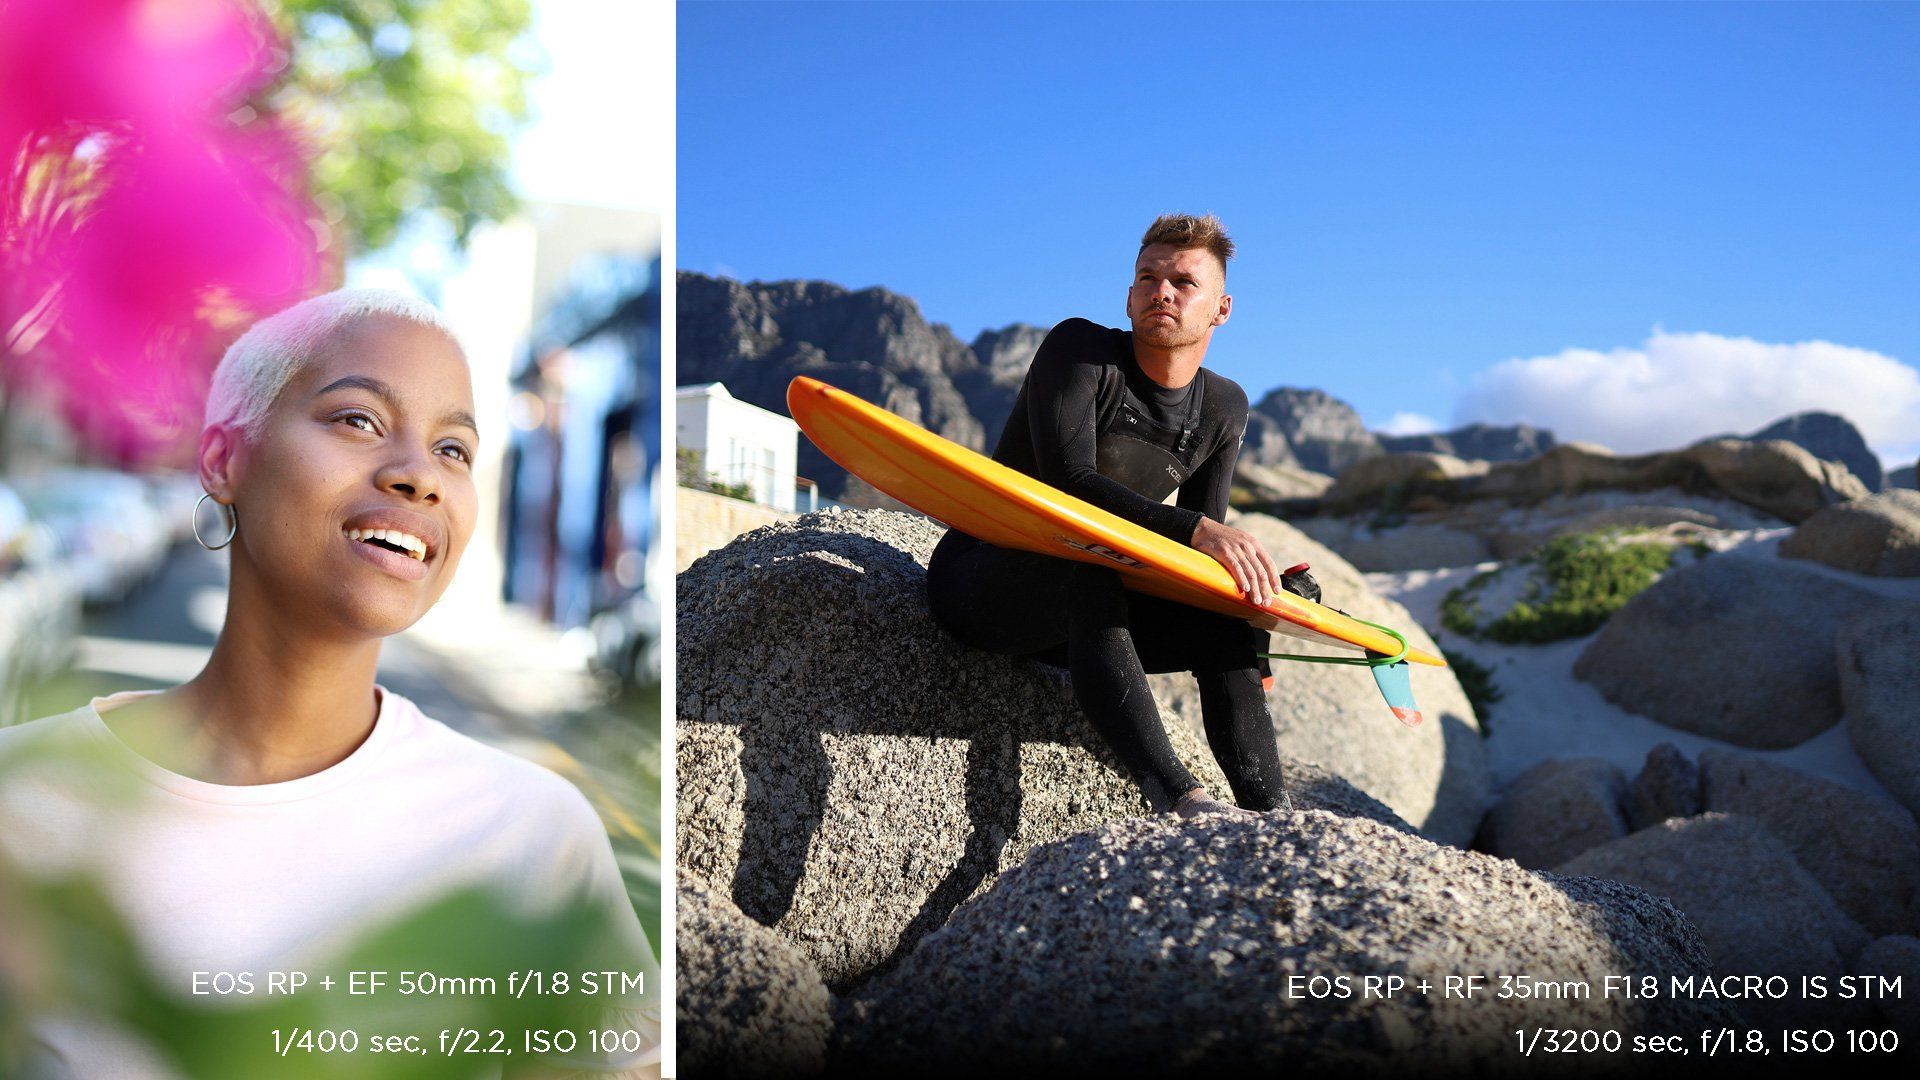 A composite picture: a smiling young woman beside out of focus flowers in one shot; and a surfer sits on some rocks with his surfboard in the other. Photos taken on a Canon EOS RP.